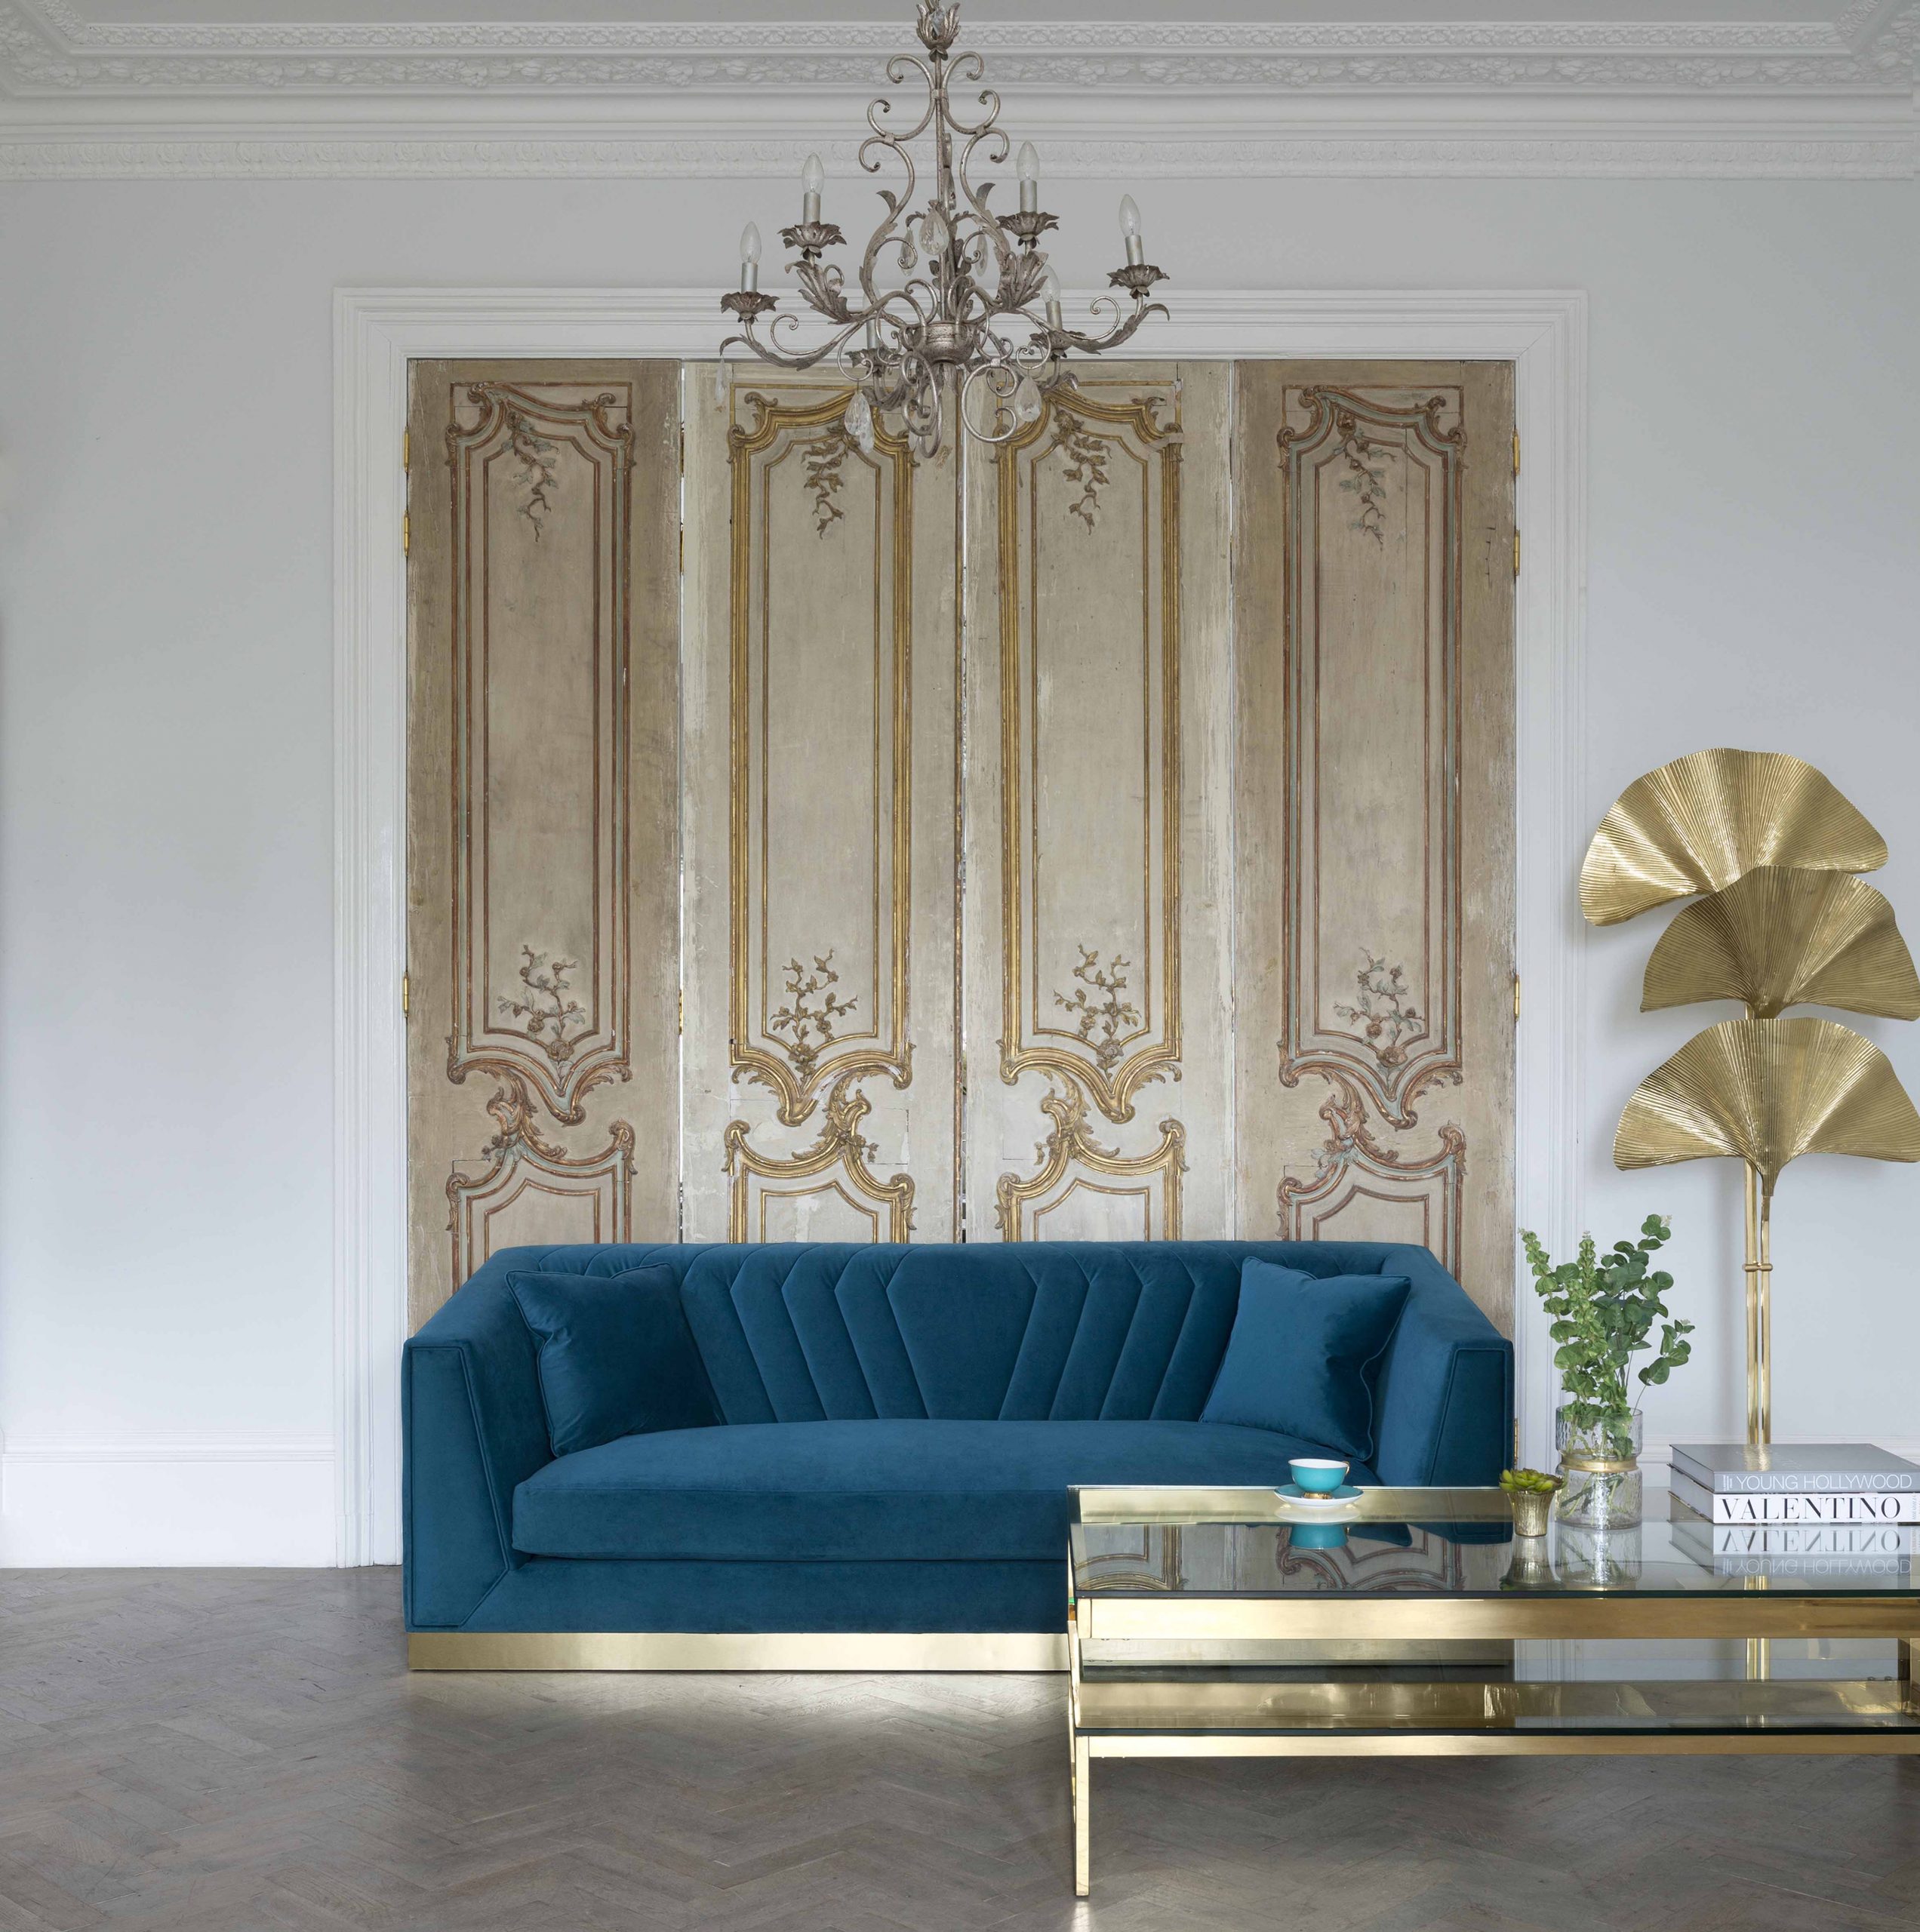 A luxurious teal-toned sofa in a elegant living space